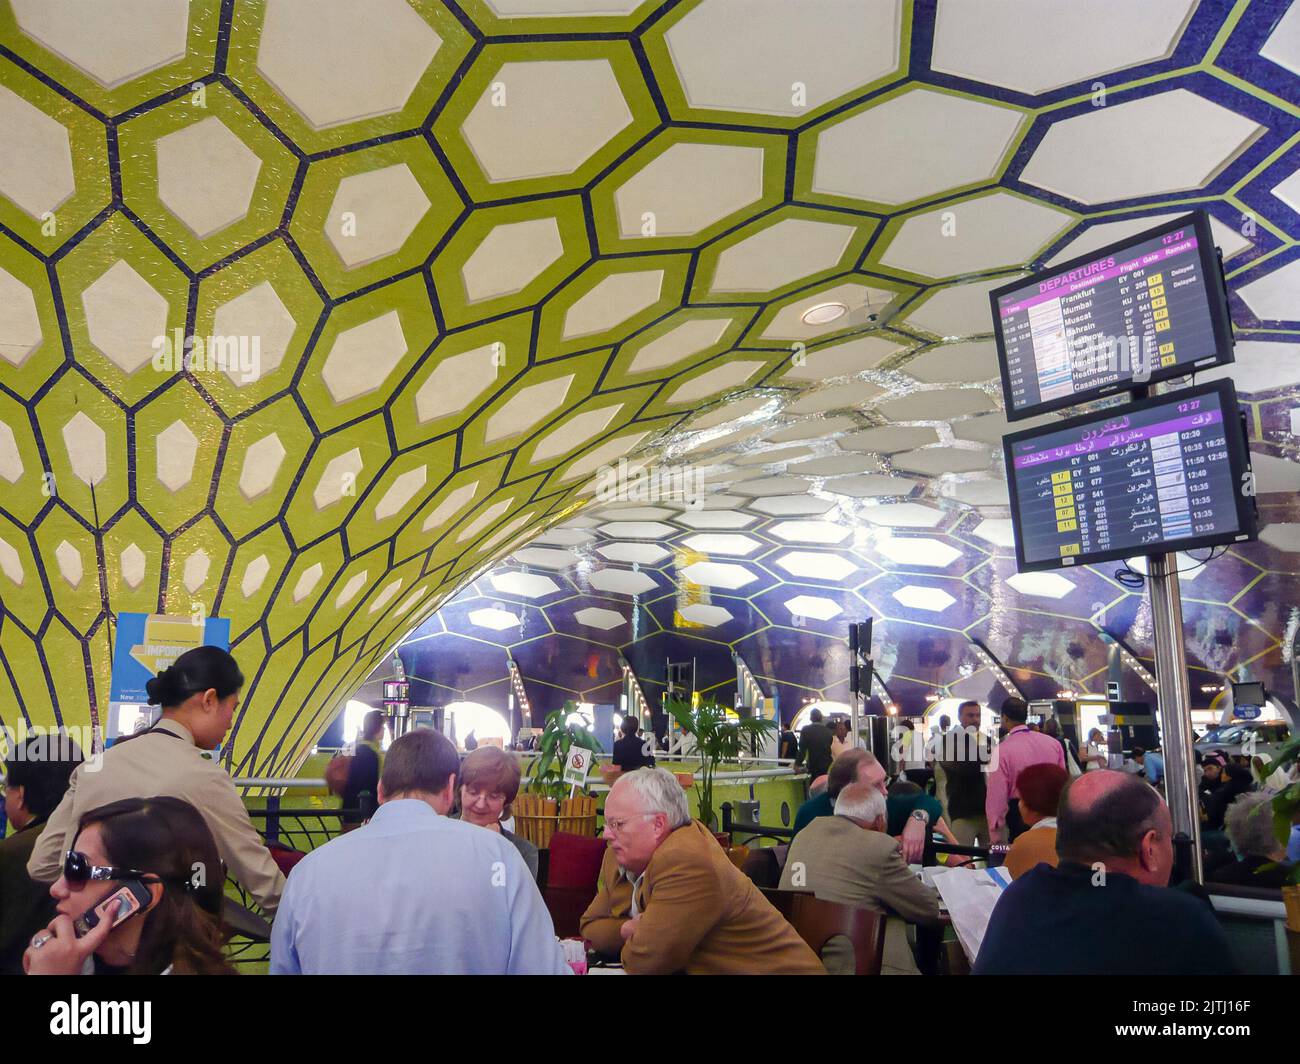 Impressive vaulted roof inside the departure lounge at Abu Dhabi International Airport Stock Photo